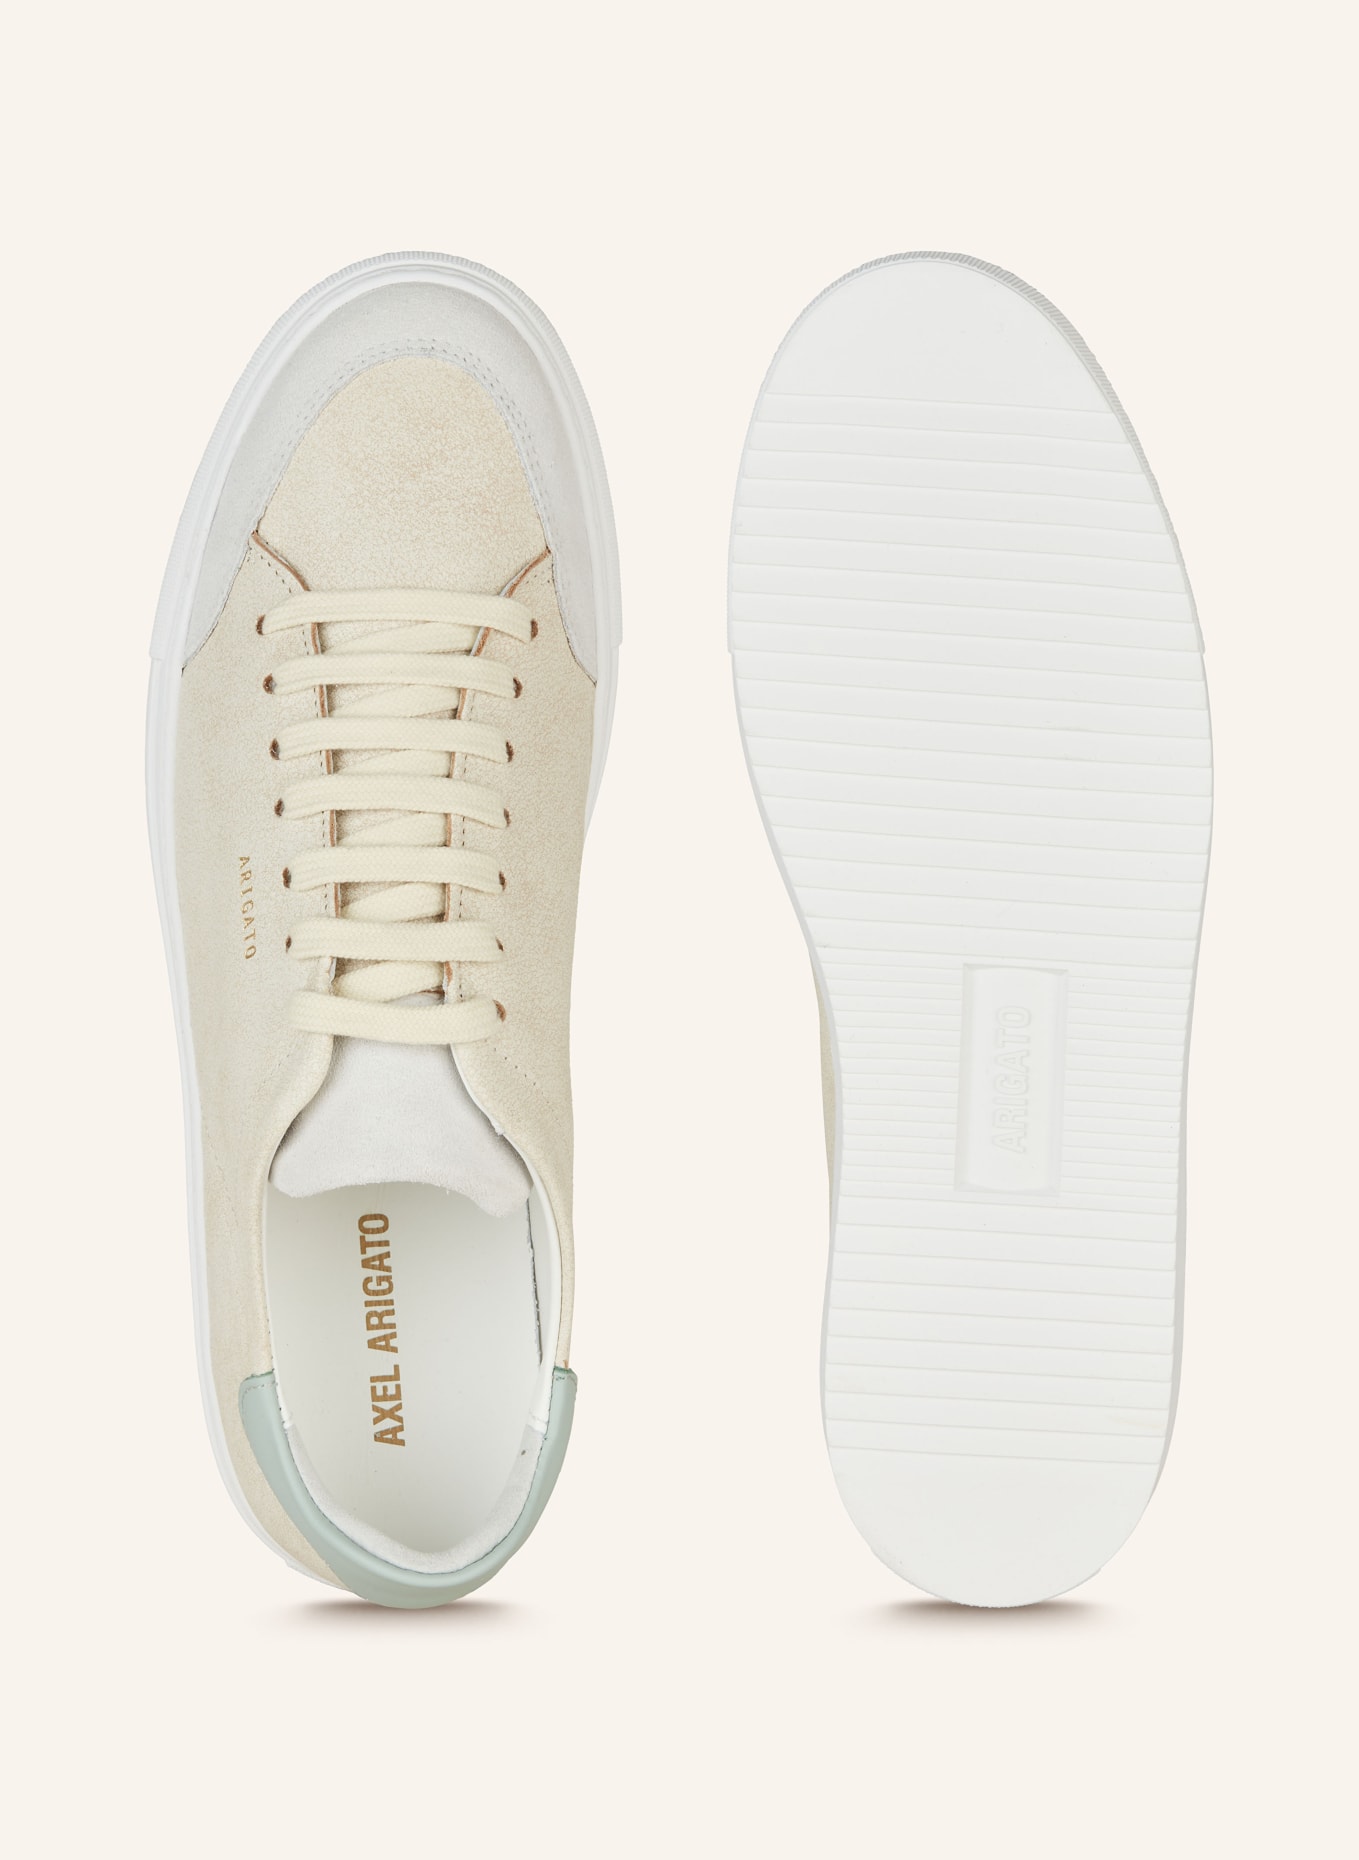 AXEL ARIGATO Sneakers CLEAN, Color: BEIGE/ LIGHT GRAY (Image 5)